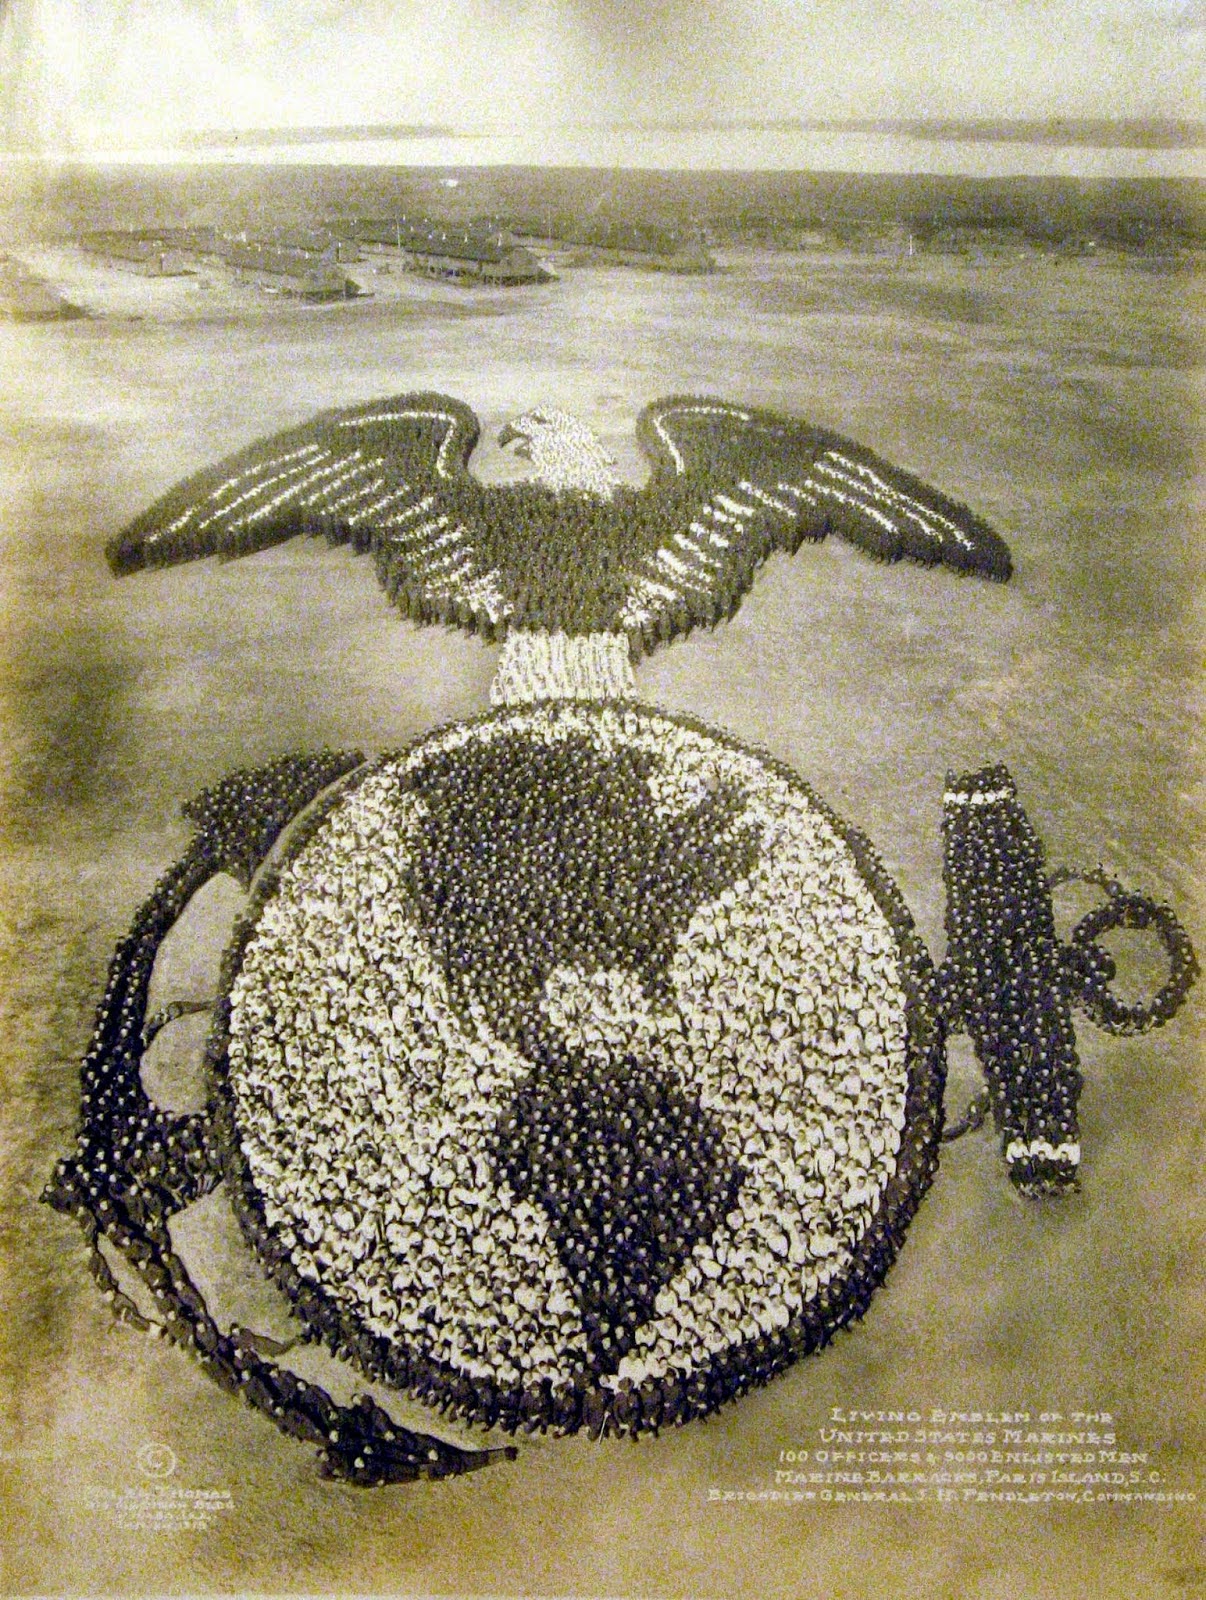 Pictures Formed by Thousands of US Soldiers during World War I (6).jpg